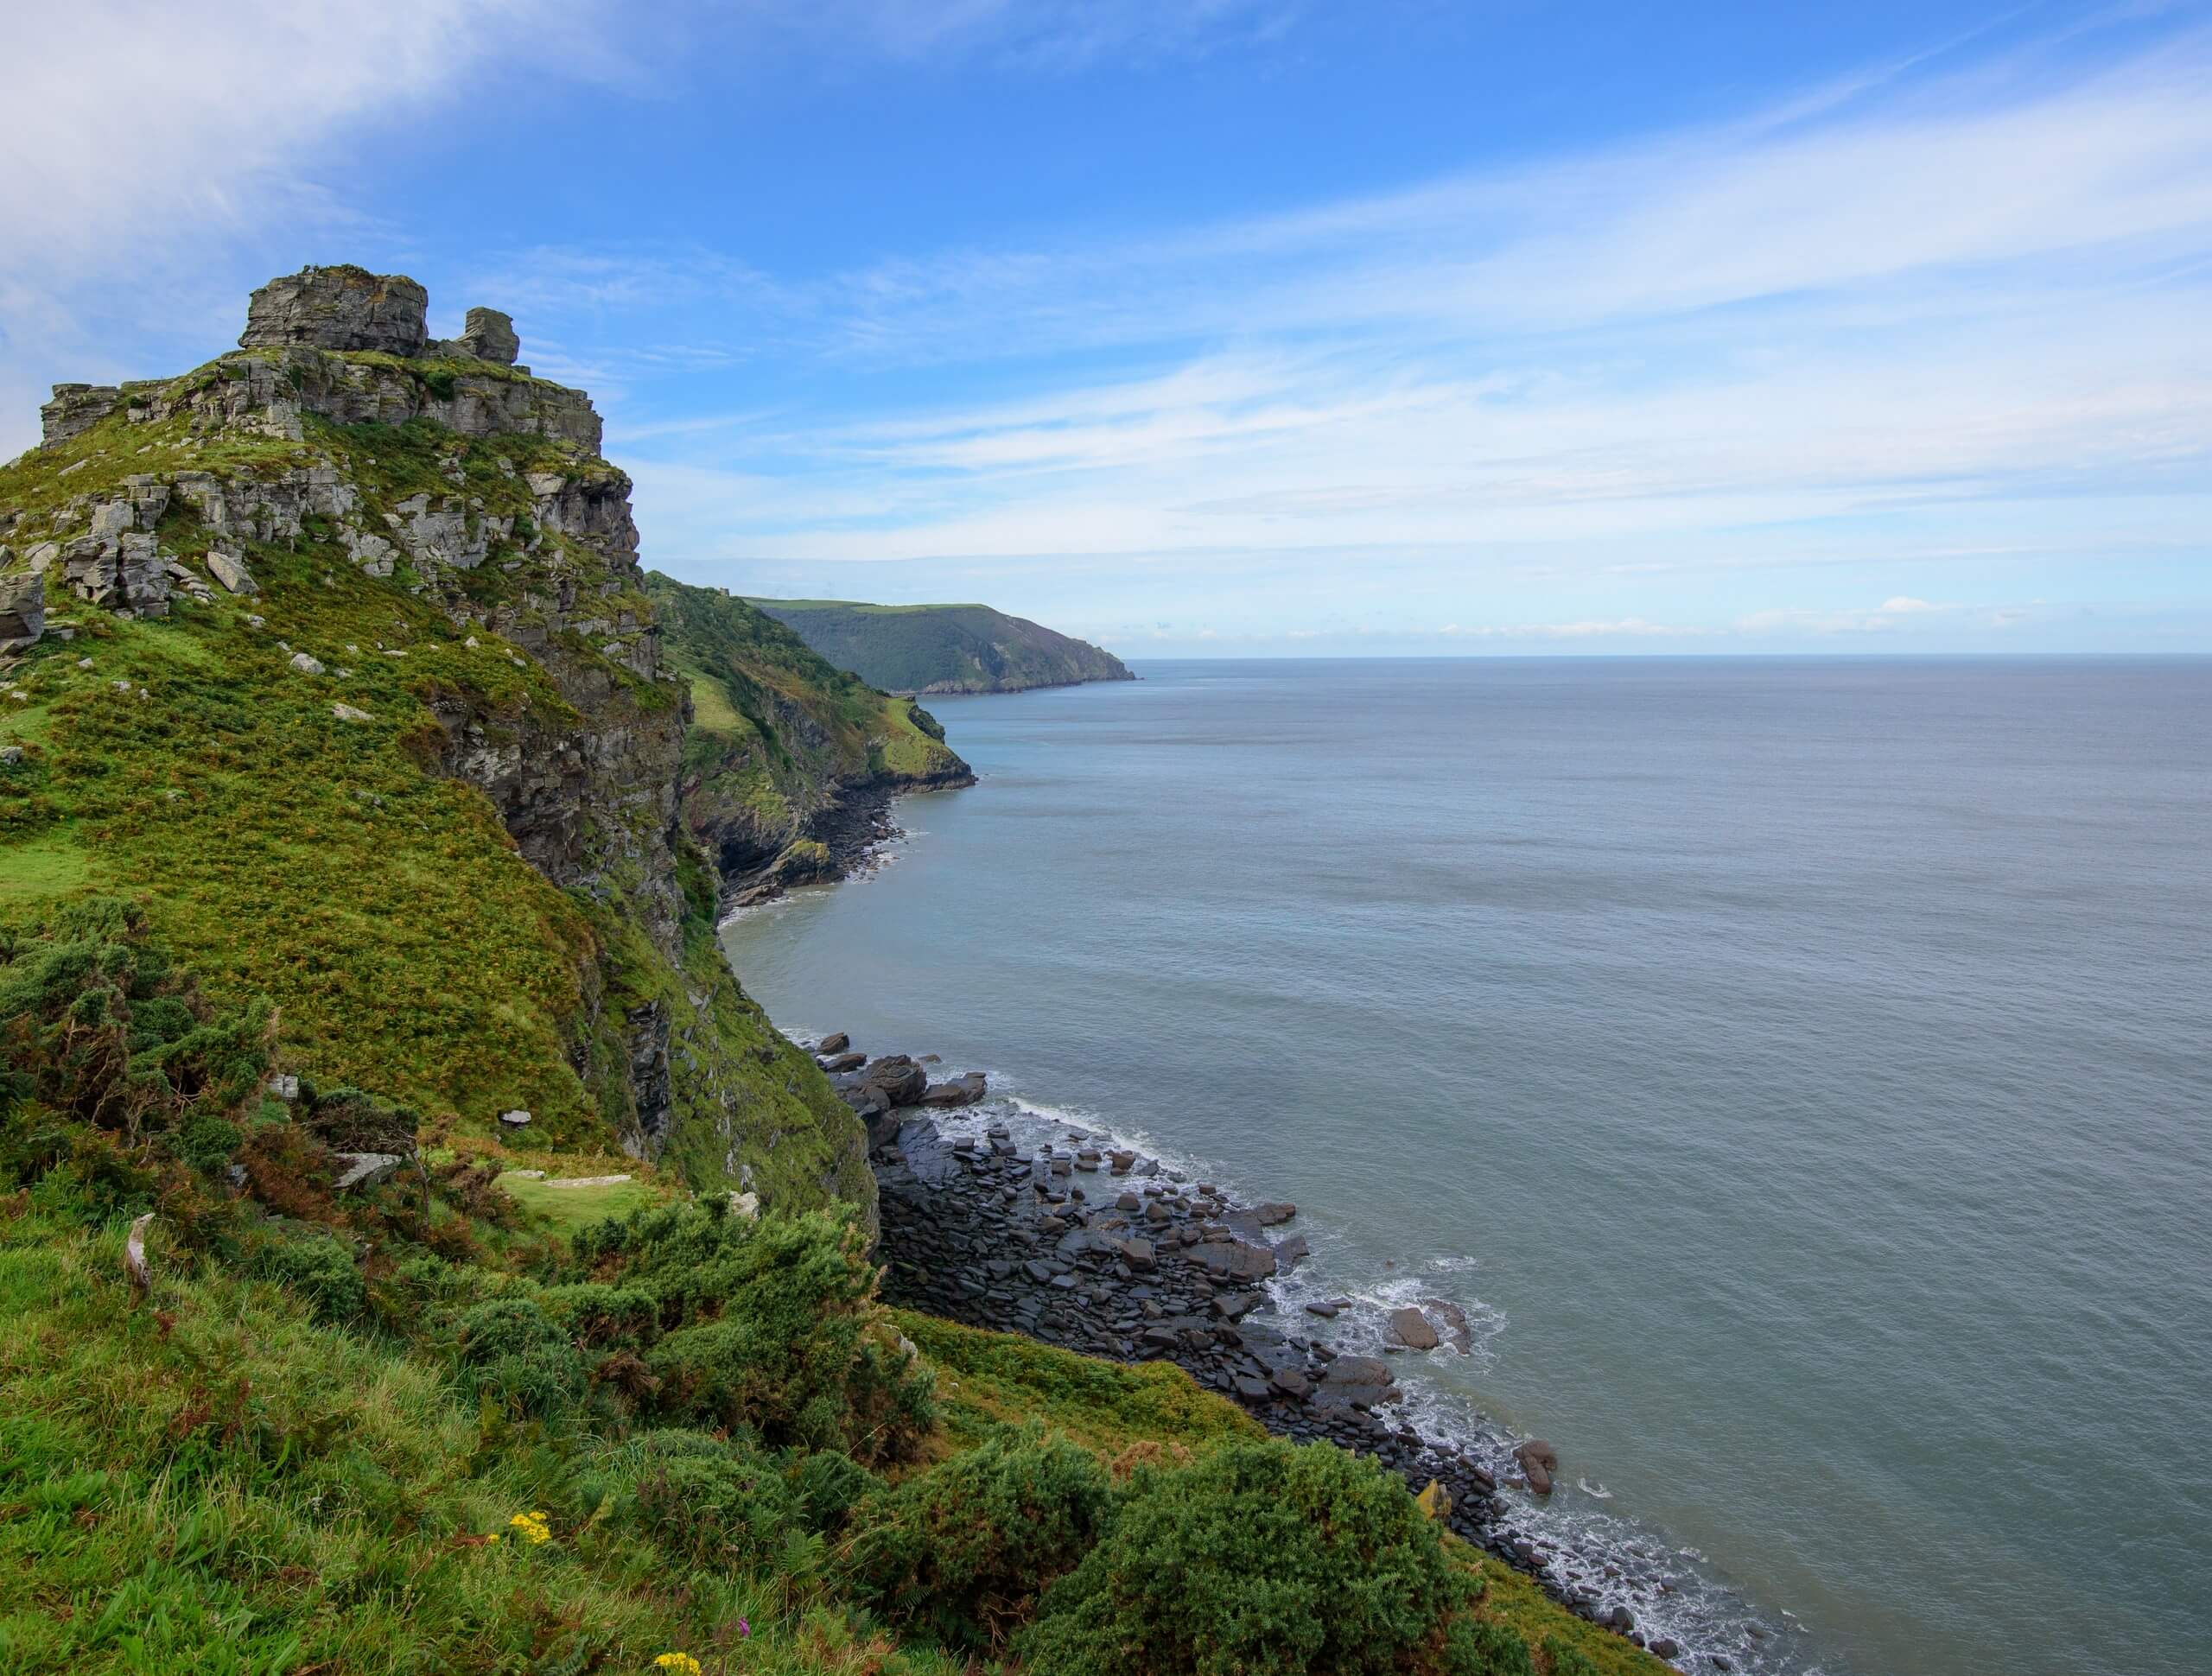 Valley of the Rocks and Lynton Walk